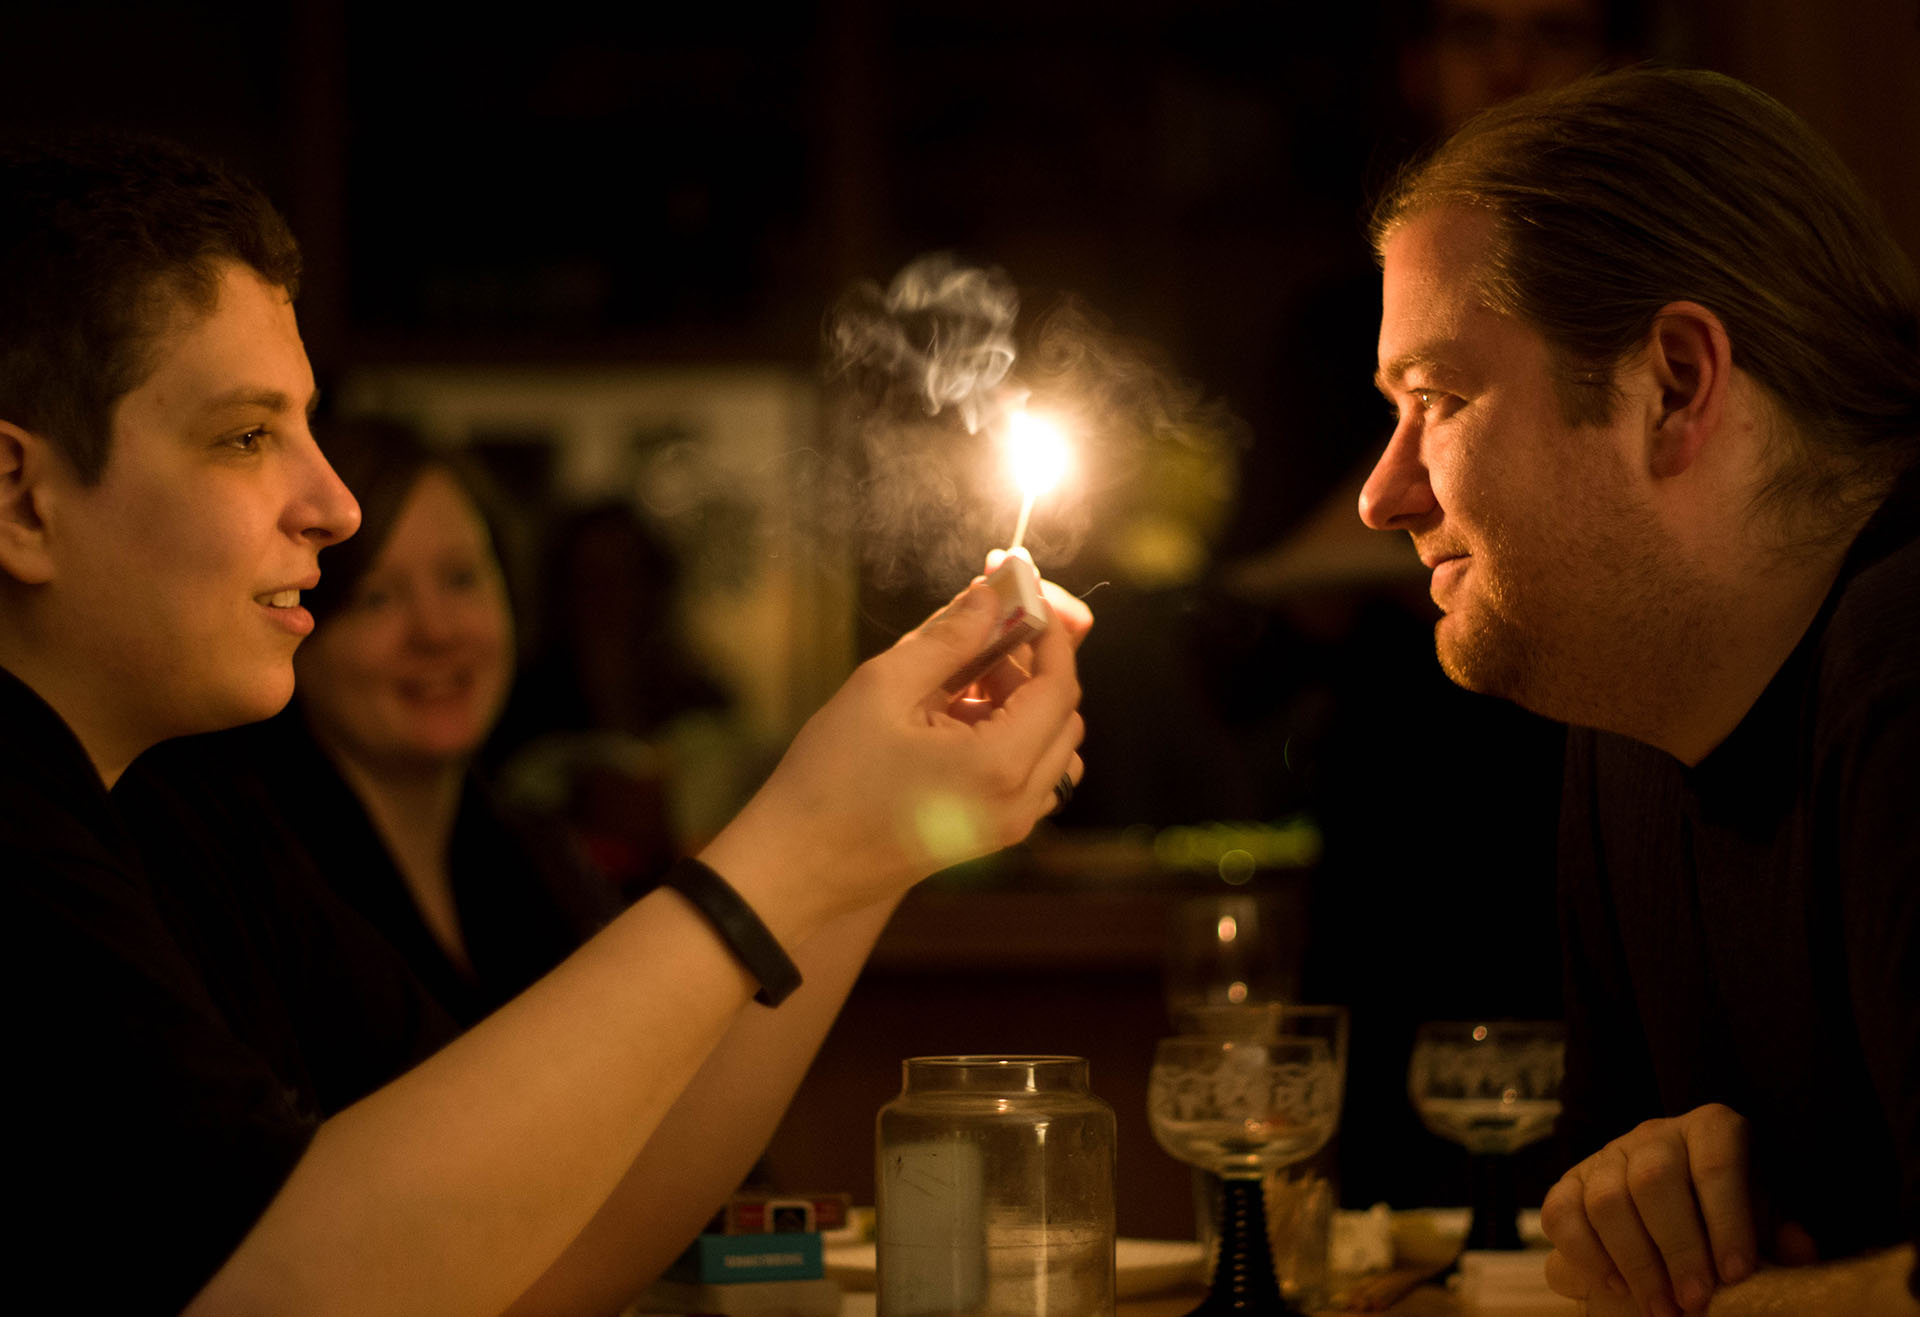 Two people stare at a smoking flame held between them